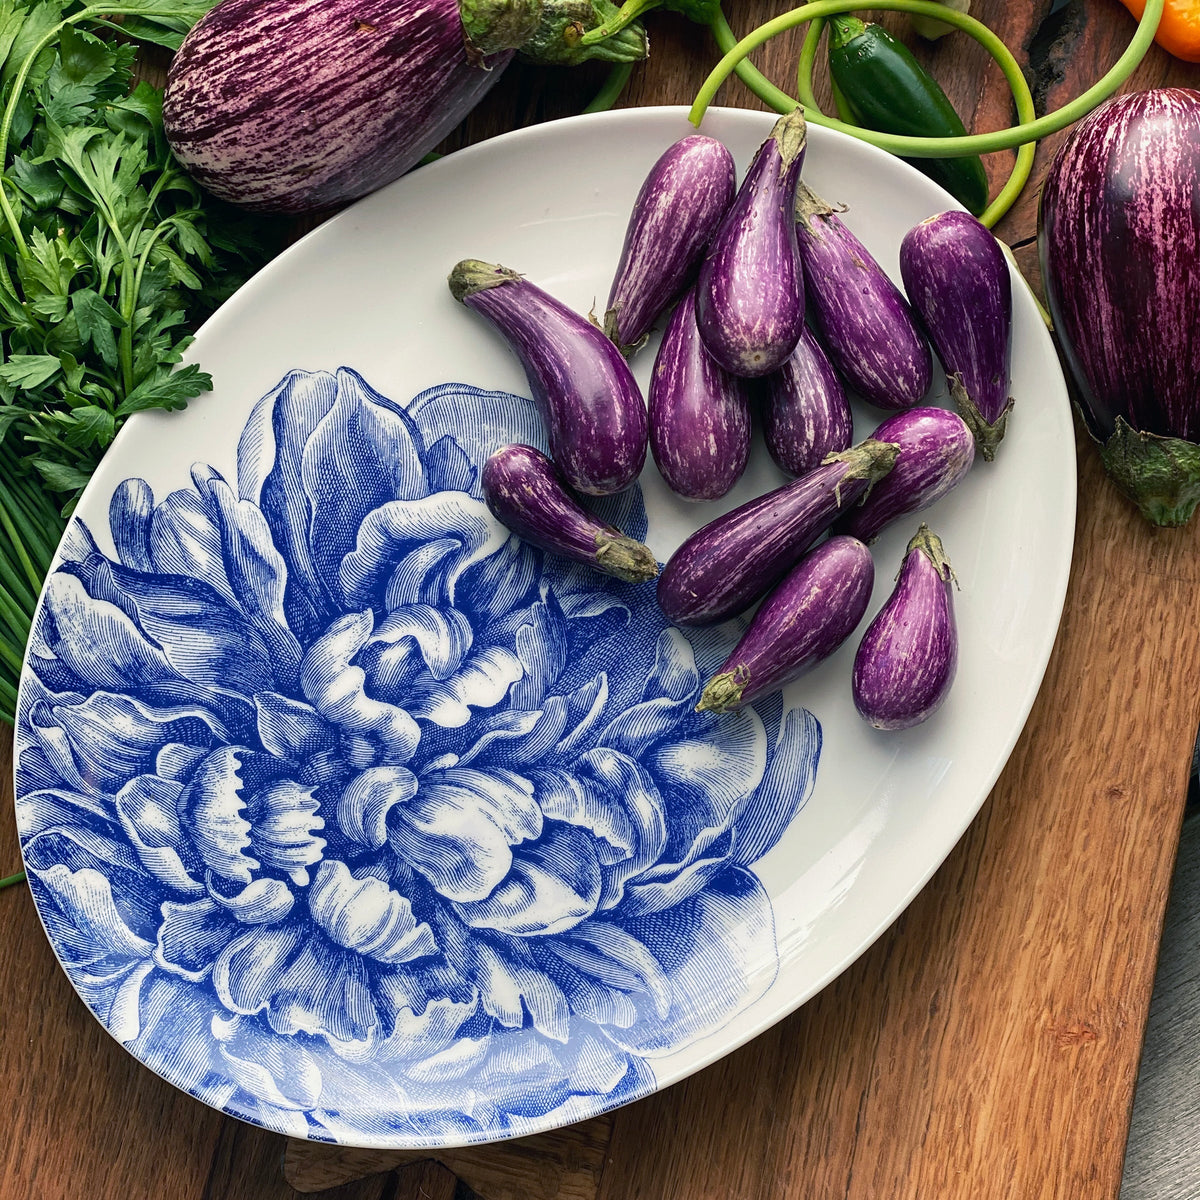 A Peony Blue Medium Coupe Oval Platter from Caskata Artisanal Home adorned with deliciously roasted eggplants.